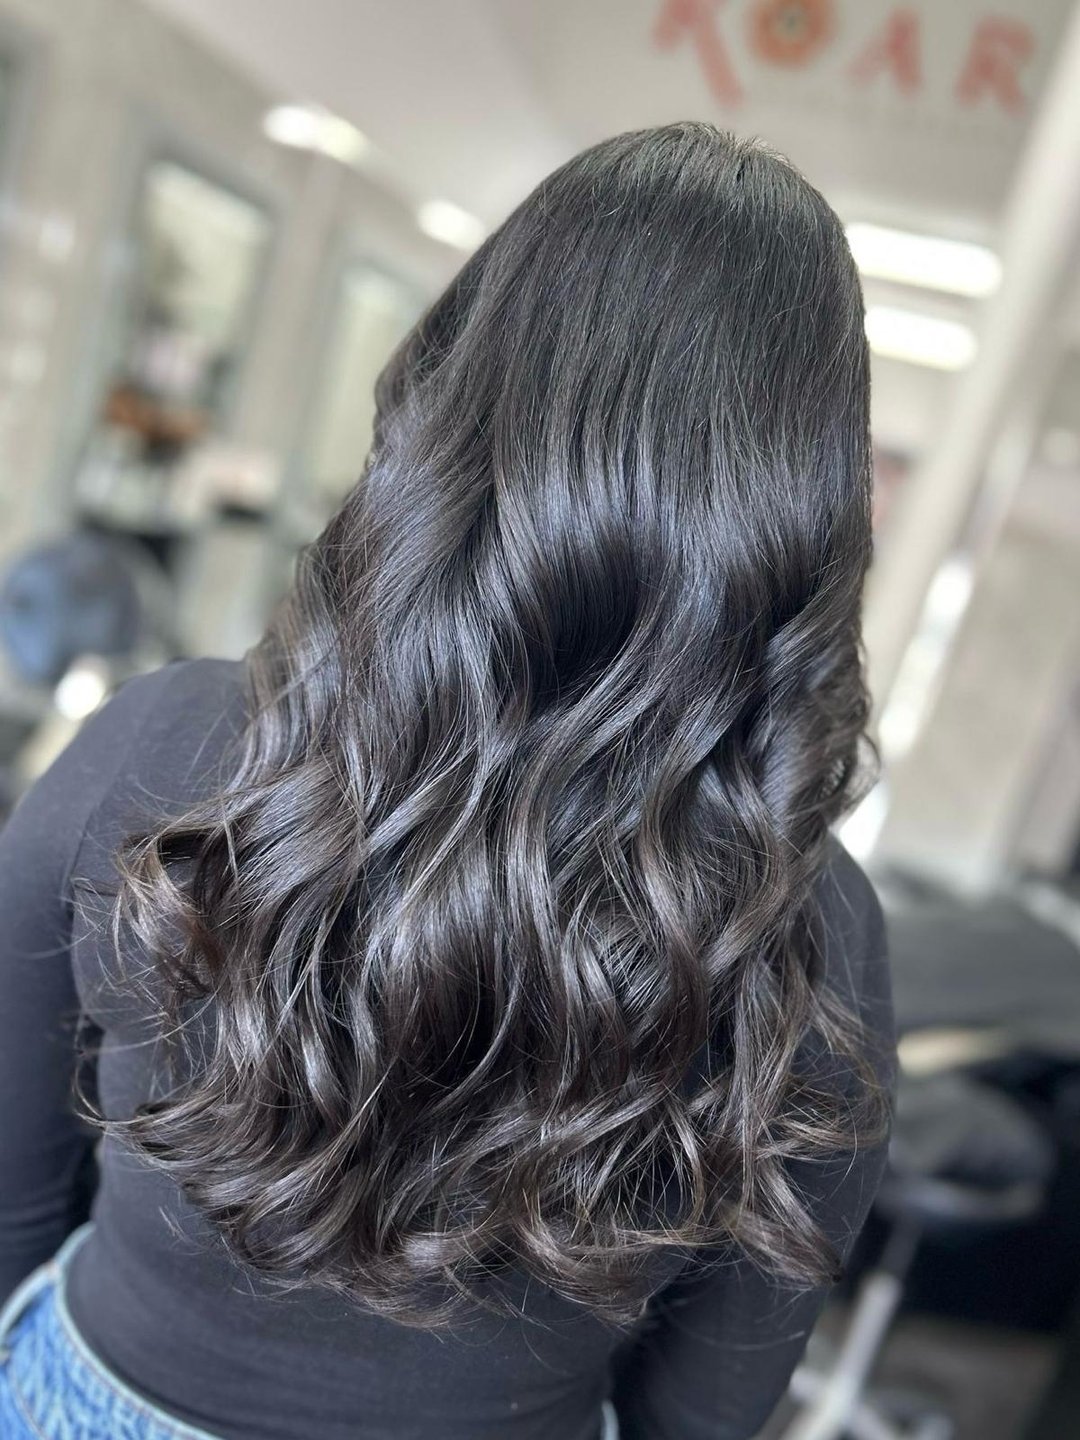 Unleashing the lustrous beauty of long, wavy black locks! ✨ 

Our client's hair is a glossy masterpiece that speaks volumes. Ready to turn heads with irresistibly shiny waves? Click the link in our bio and let's make your hair the epitome of brillian